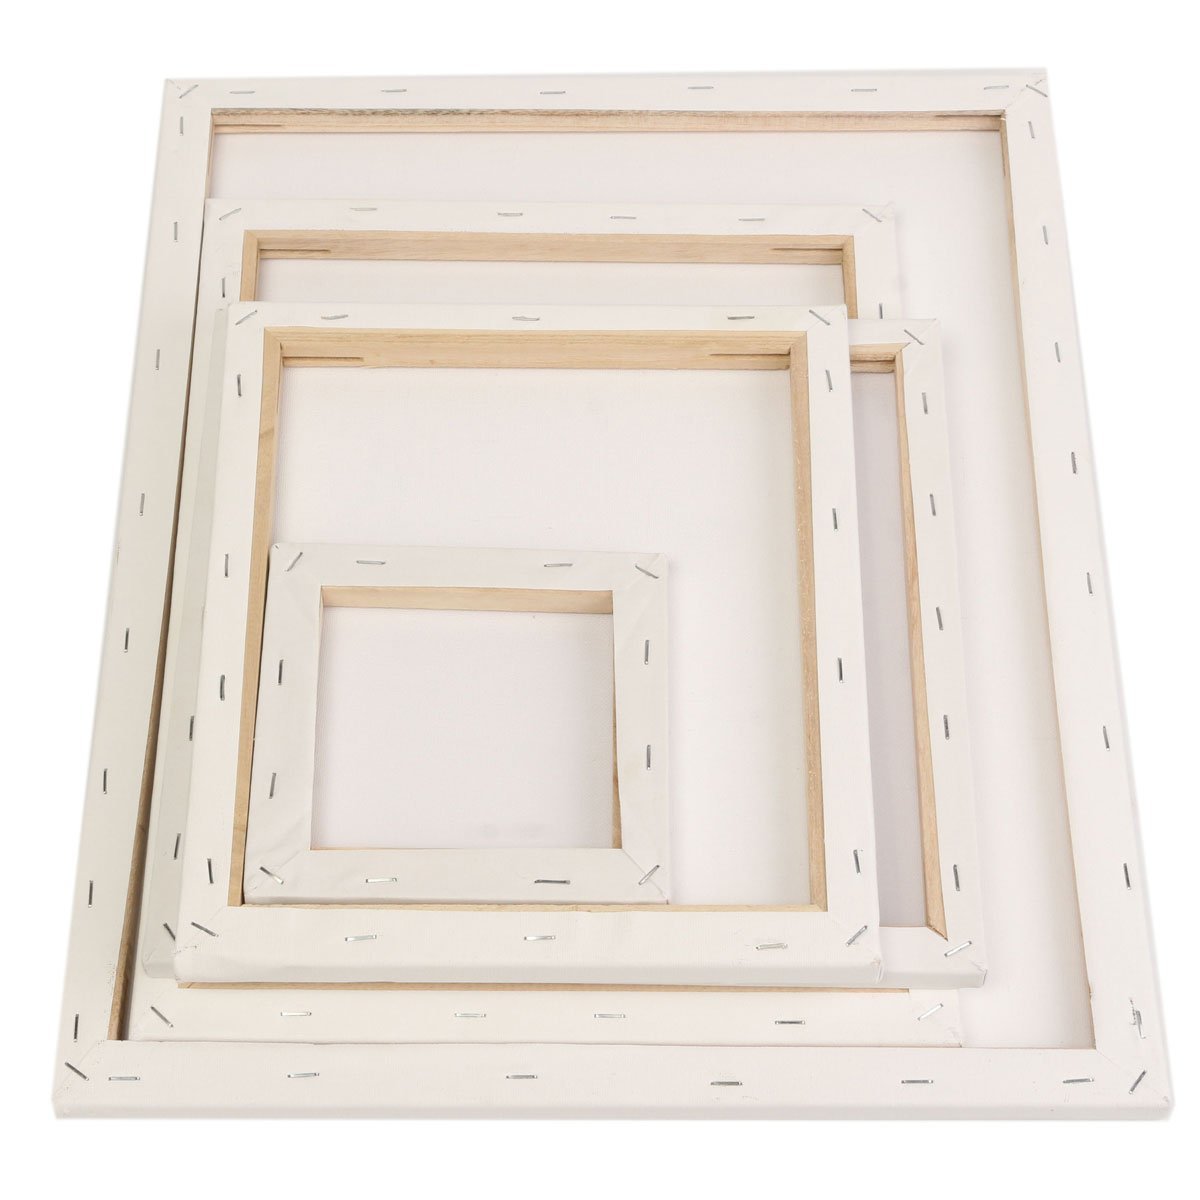 Stretched Artist Wooden Frame With Blank Canvas